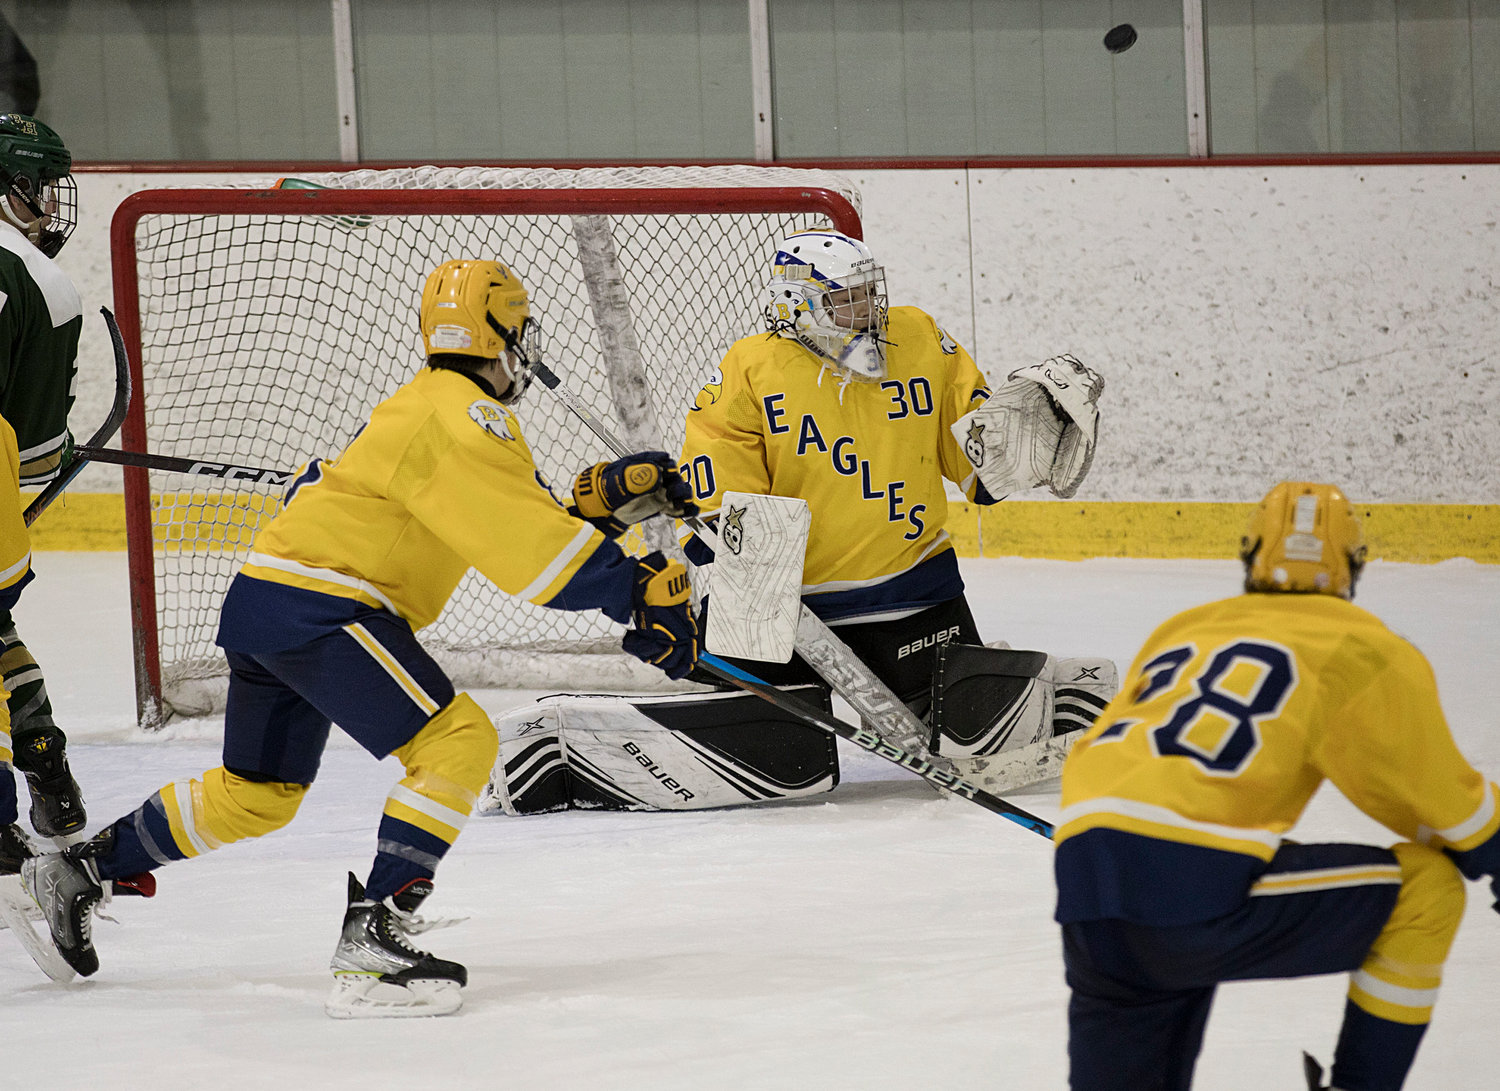 Goalie Dominic Bruzzi deflects a shot while battling Hendricken in game two of the Division 1 quarterfinals, Sunday.